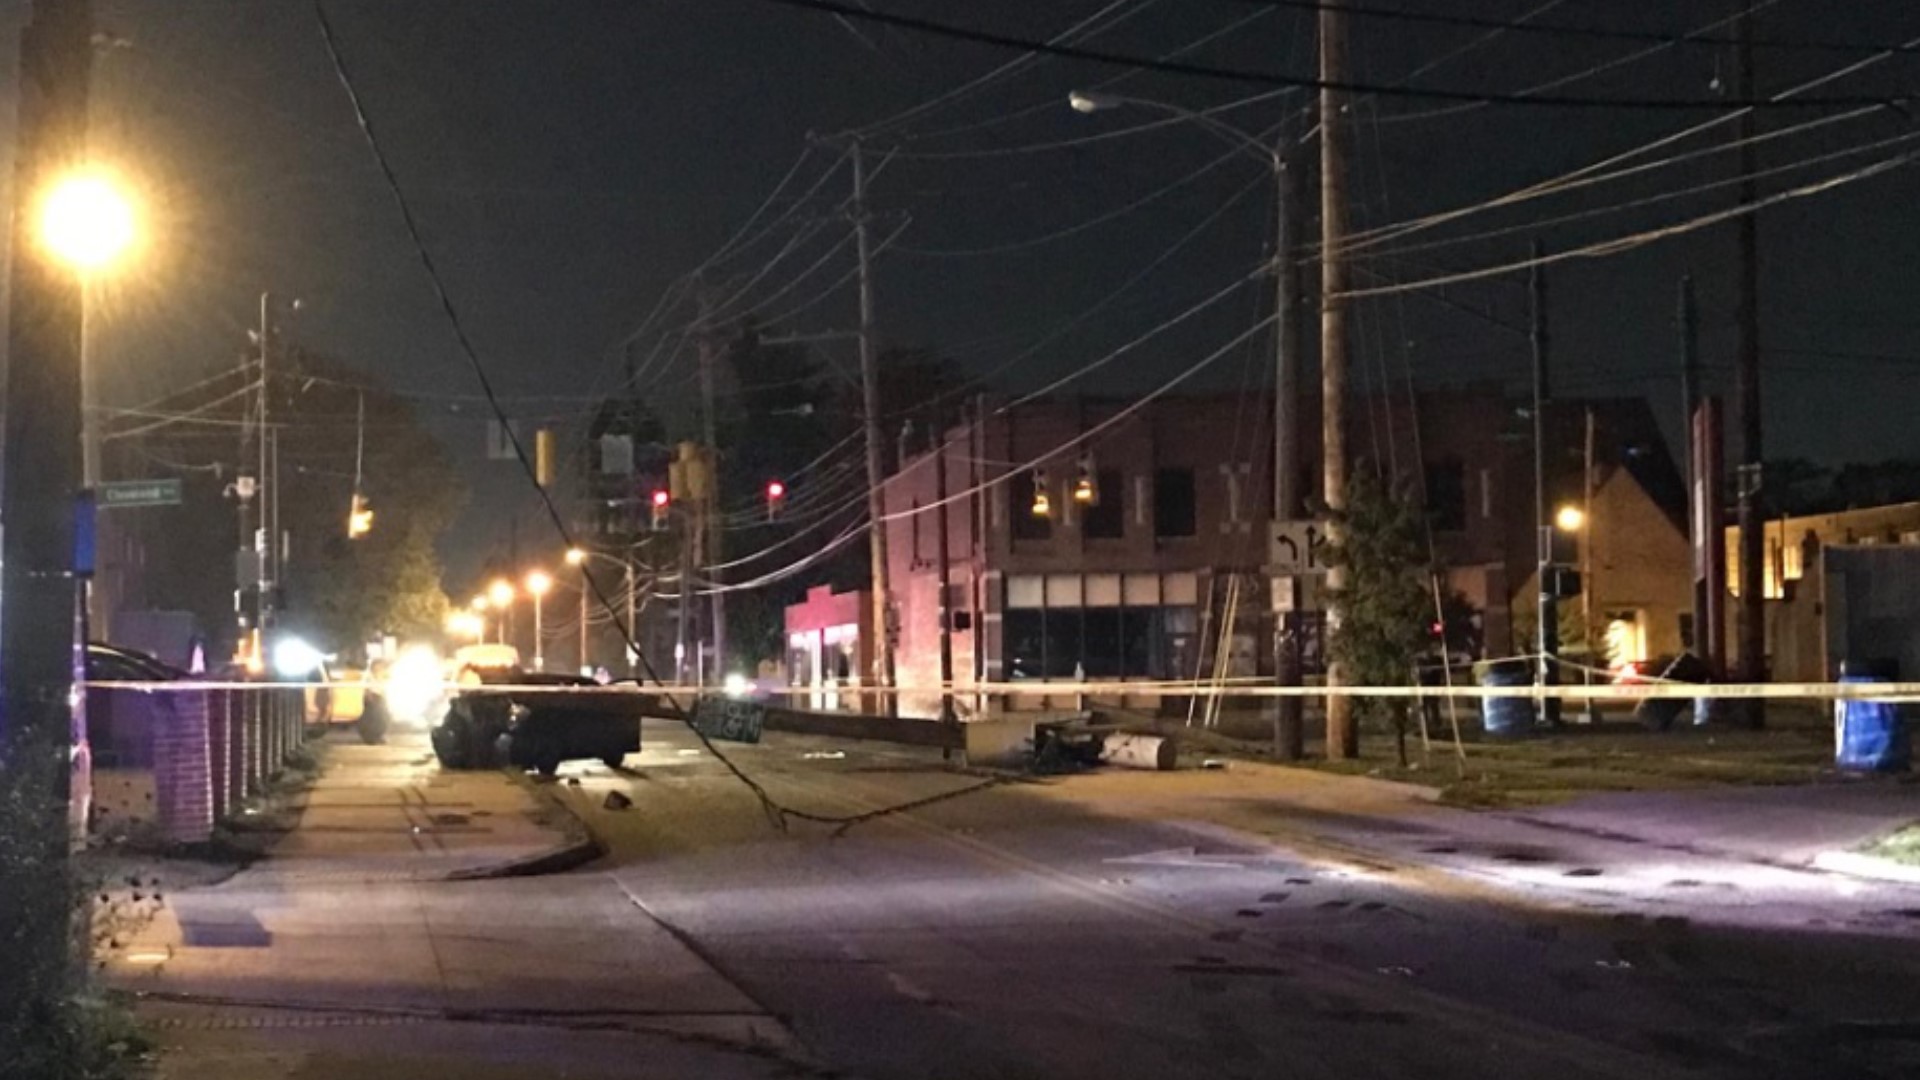 Columbus police said the crash happened just before 6:15 p.m. at the intersection of Cleveland Avenue and East Hudson Street.